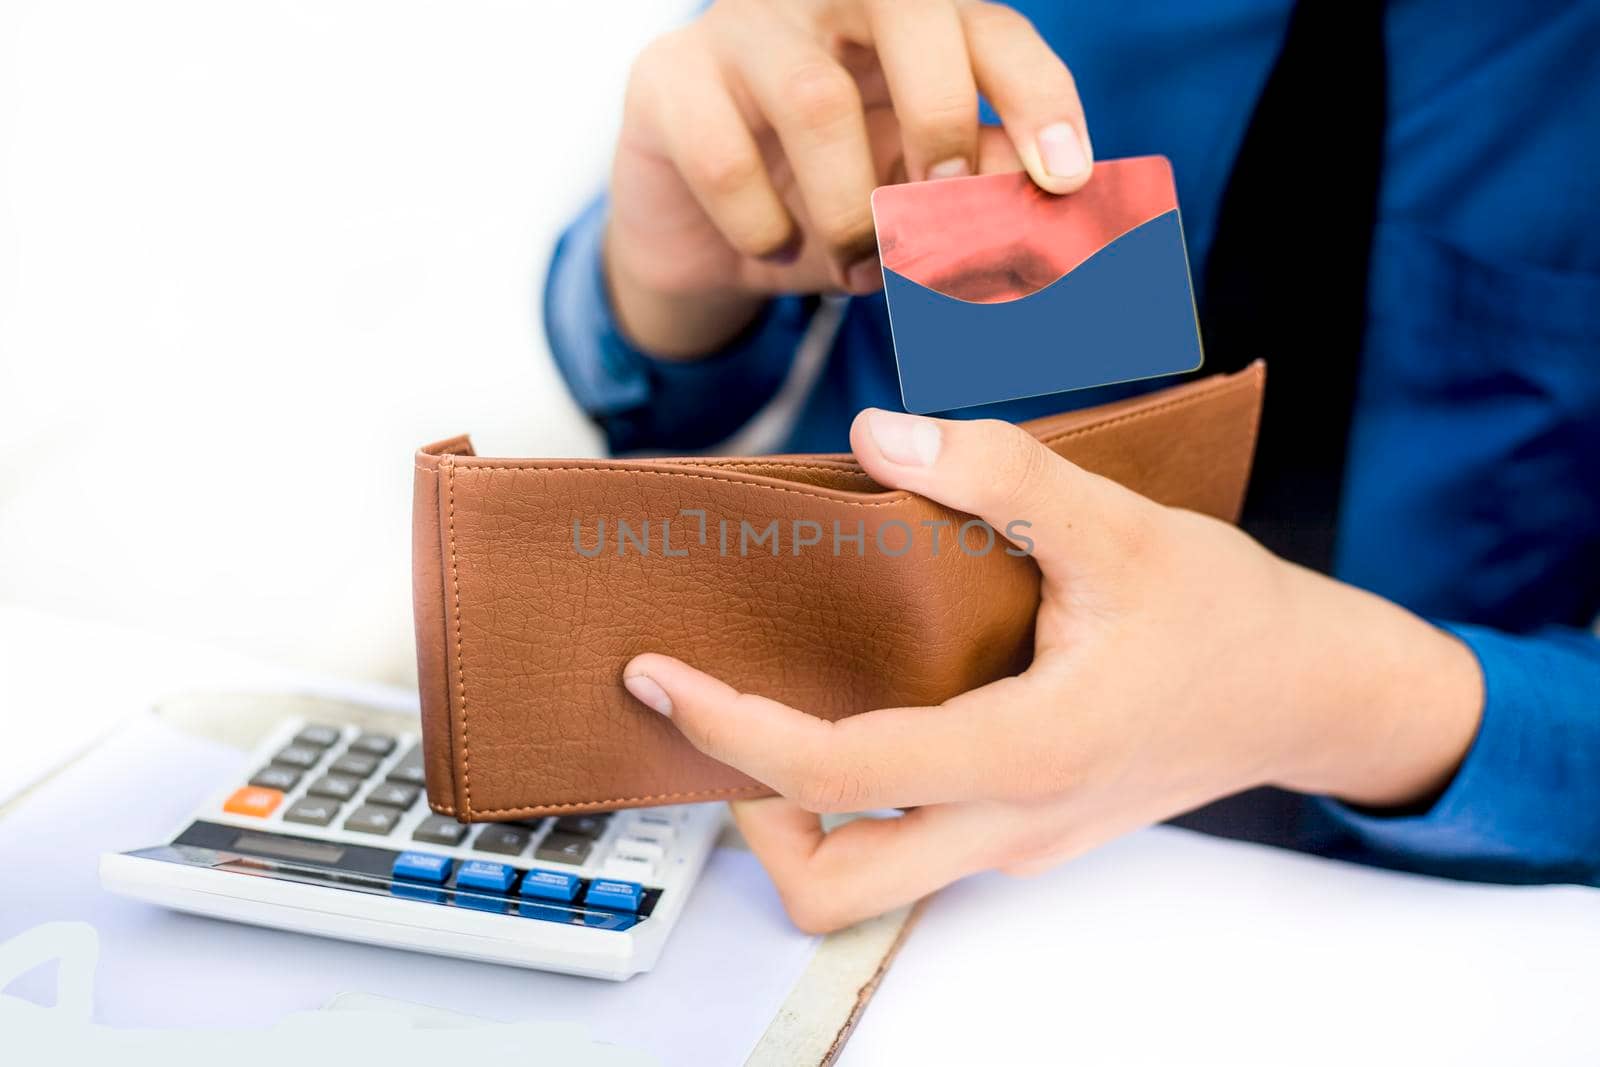 Businessman wearing a dark blue colored shirt with black tie and taking out his credit card from his brown colored wallet isolated on white.